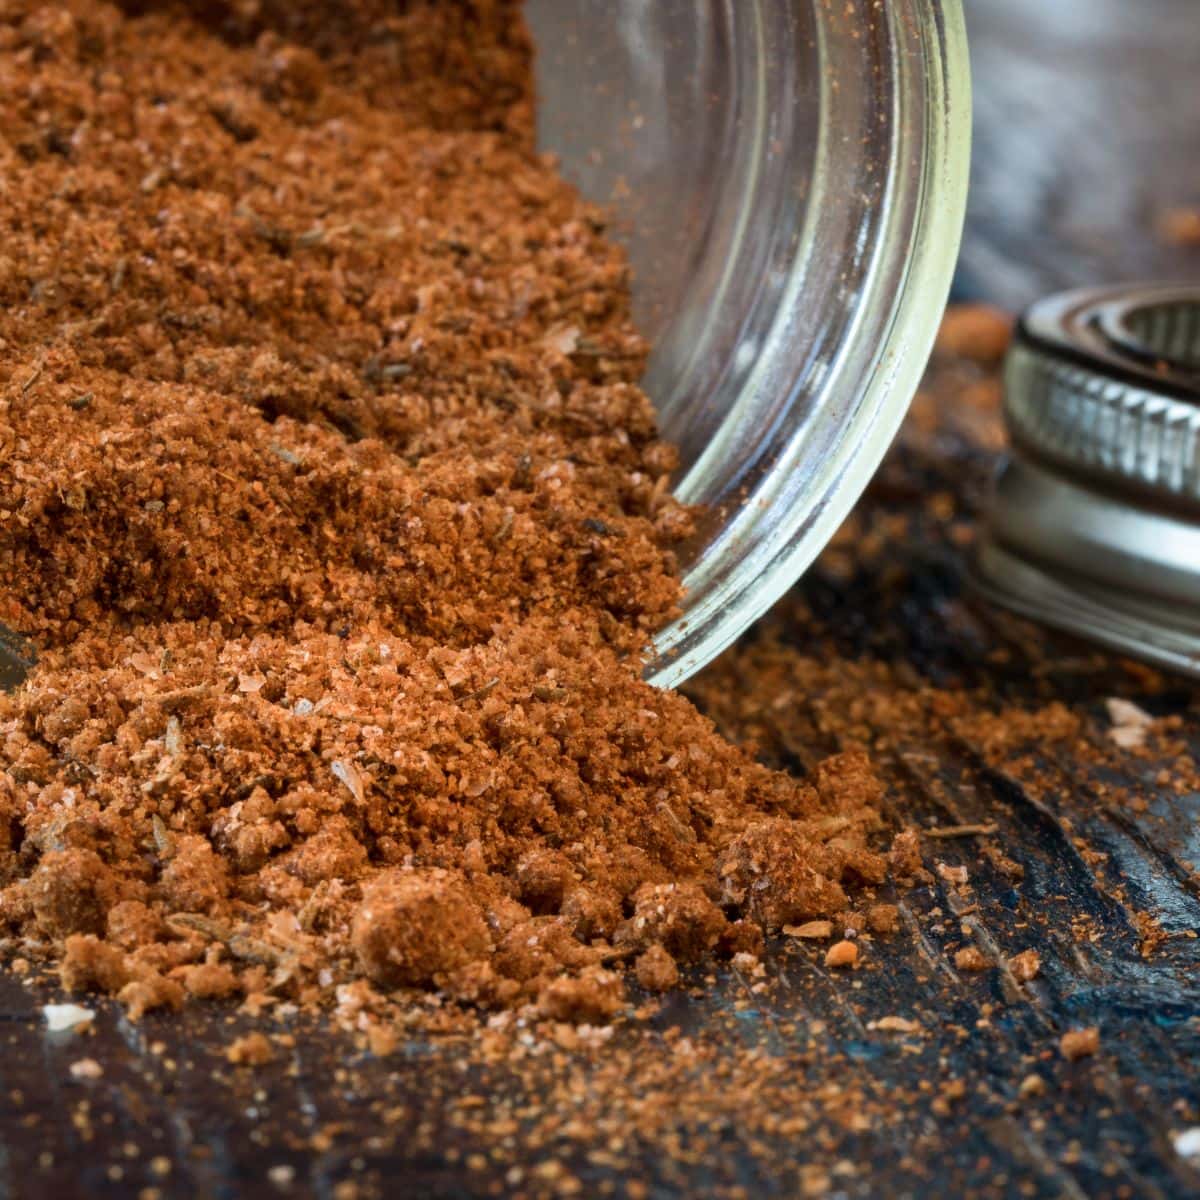 Steak rub spilling out of a jar that's tipped over.